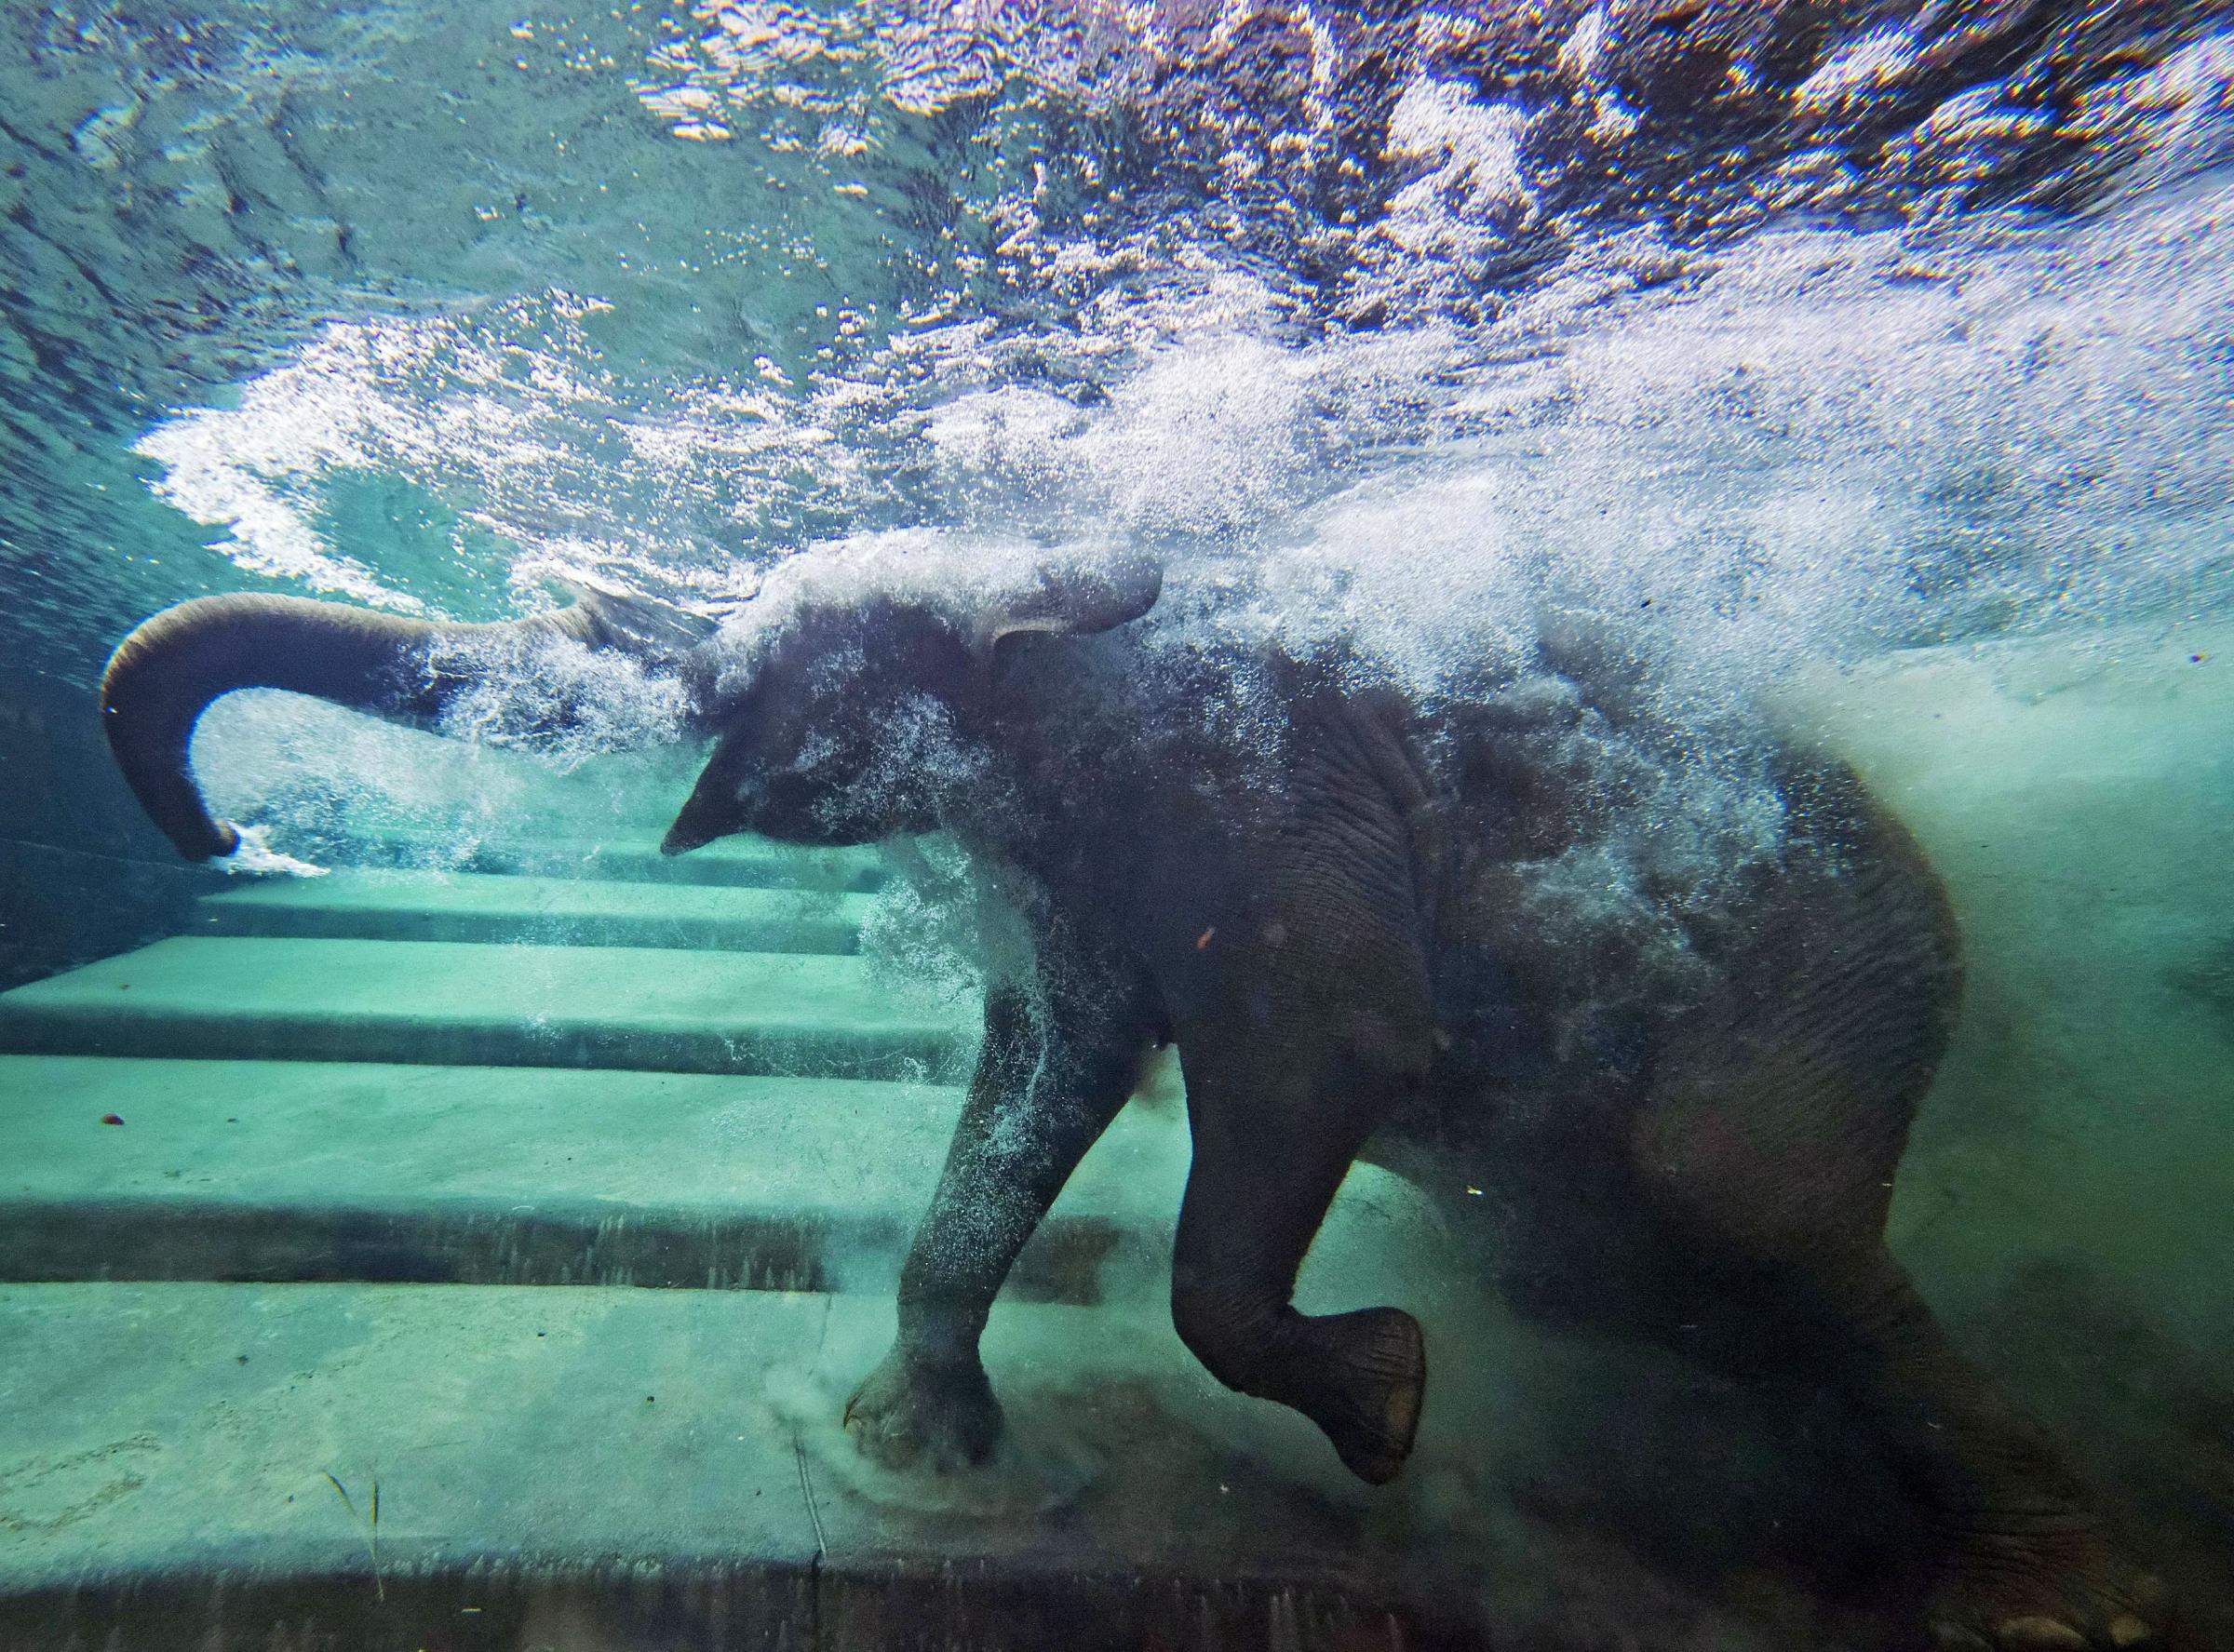 An elephant immerses behind a window in the elephants' indoor pool at the Zoo in Leipzig, Germany on Aug. 5, 2014.